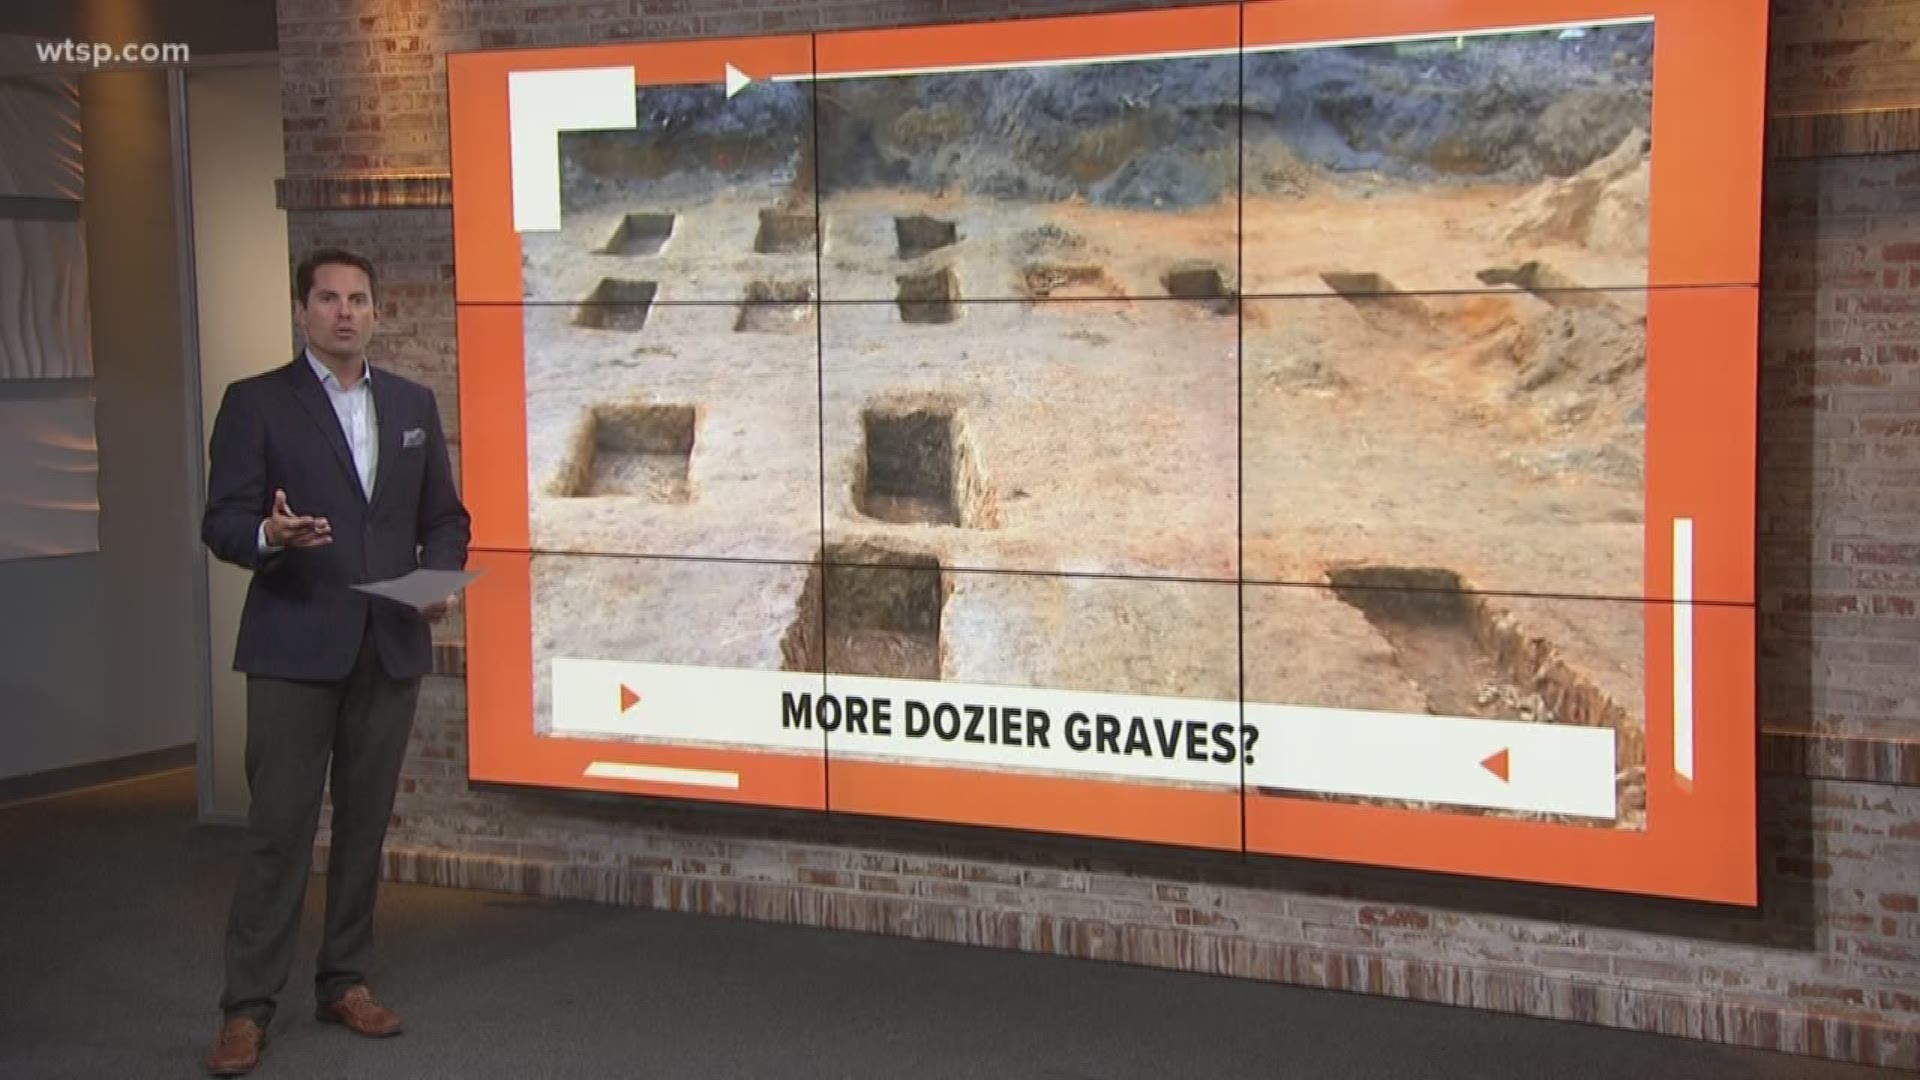 University of South Florida researchers have previously documented 55 graves near the school, though they estimate nearly 100 boys died there between 1900 and 1973. https://on.wtsp.com/2UzgJ2a